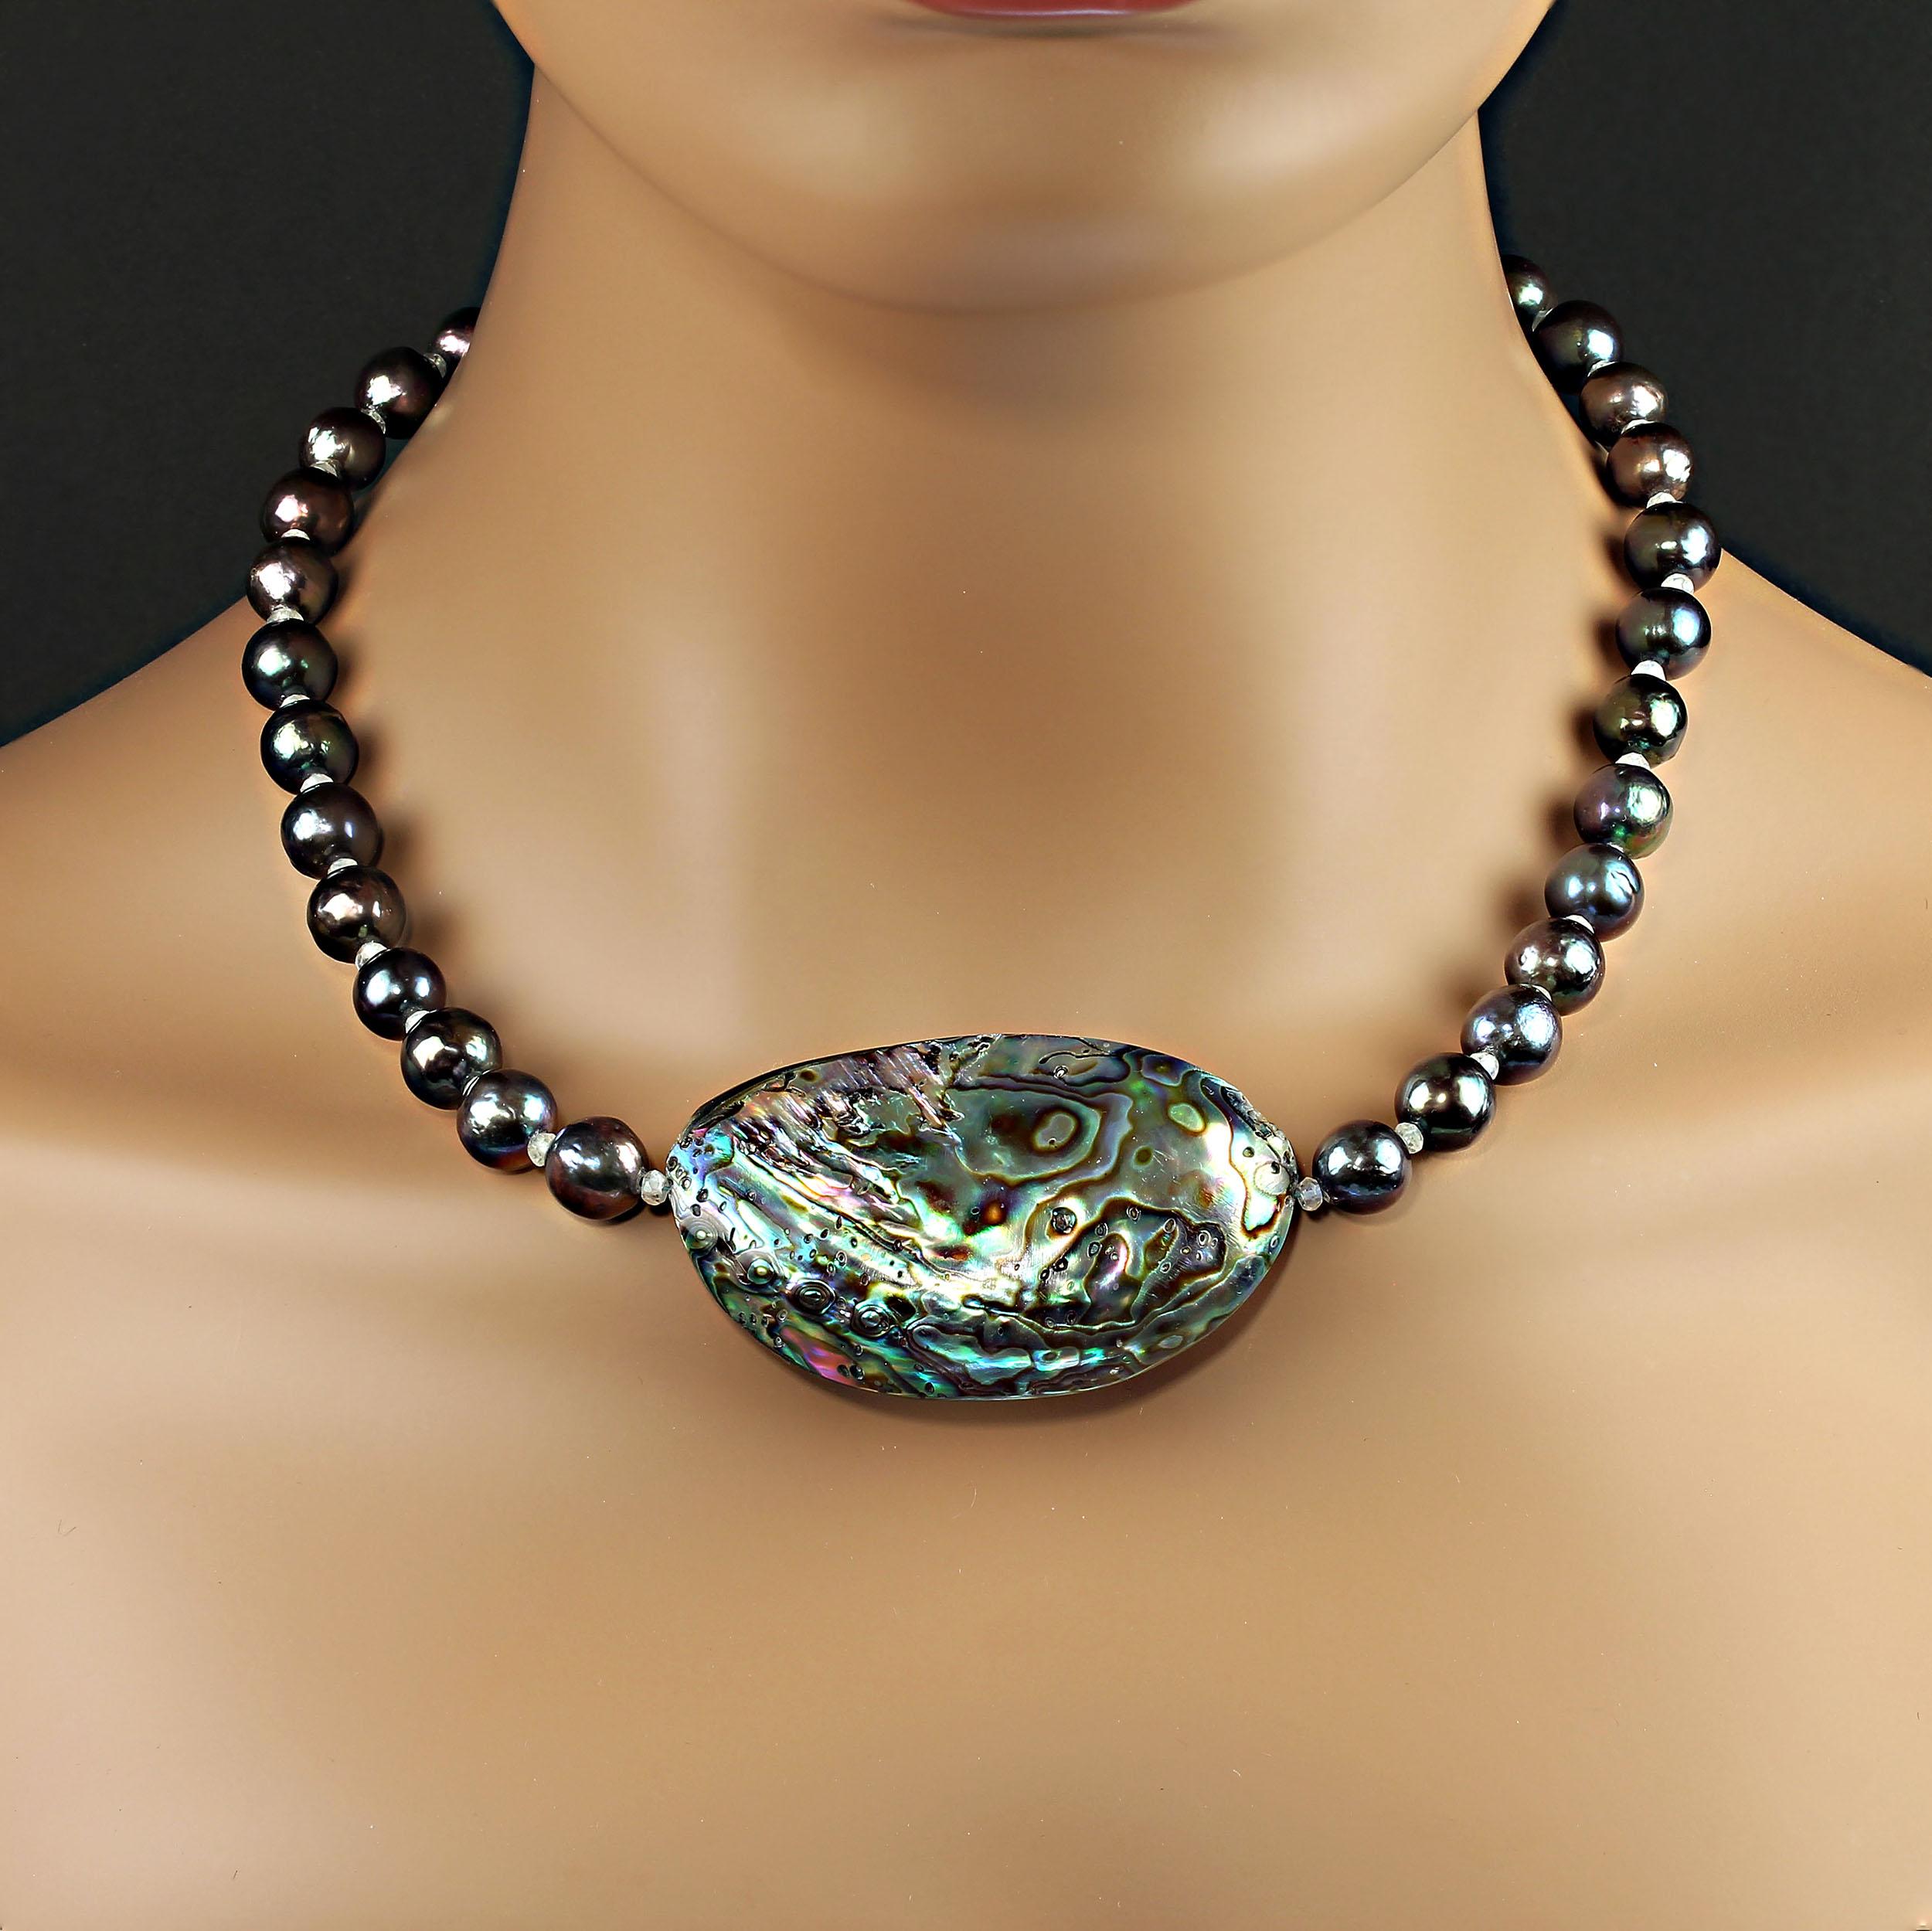 Gift from the Sea Necklace of Multi color Paua Shell focal and dyed 10mm Pearls with blue, green, and purple iridescence. The Paua Shell measures 61x37mm. Faceted Moonstone accents enhance the Pearls and Paua Shell. The necklace is secured with a